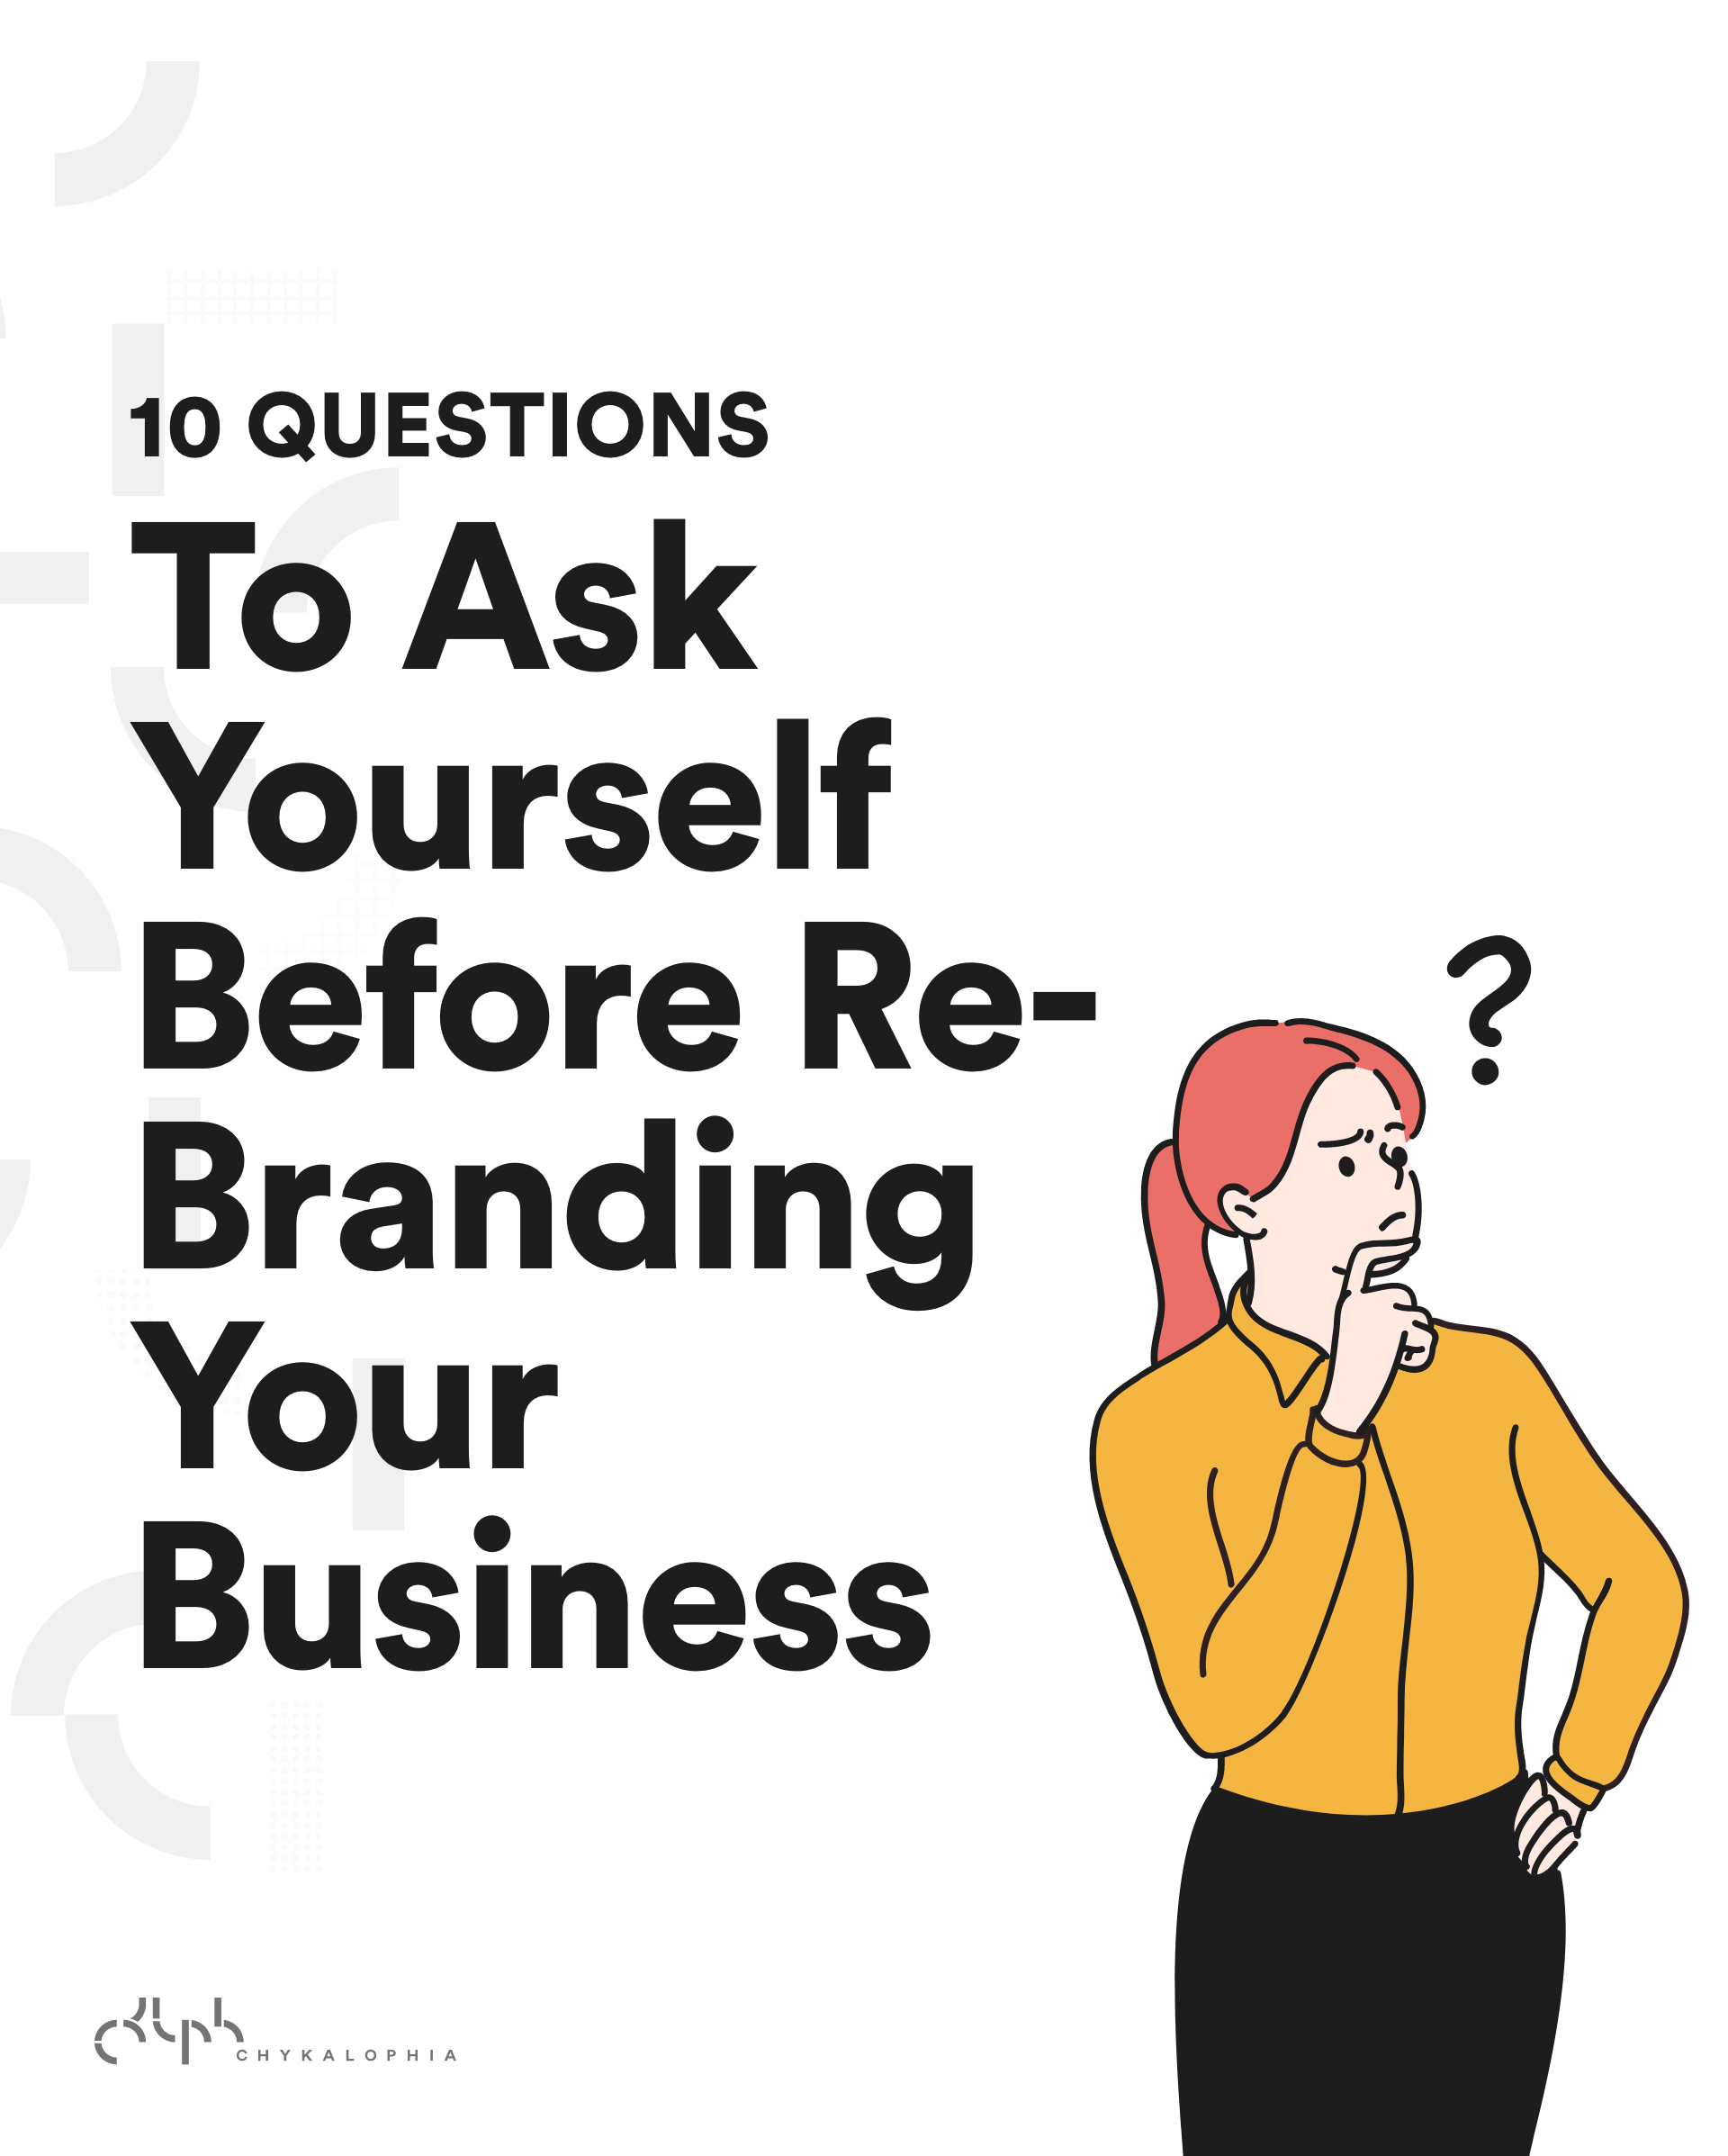 10 Questions To Ask Yourself Before Re-Branding Your Business